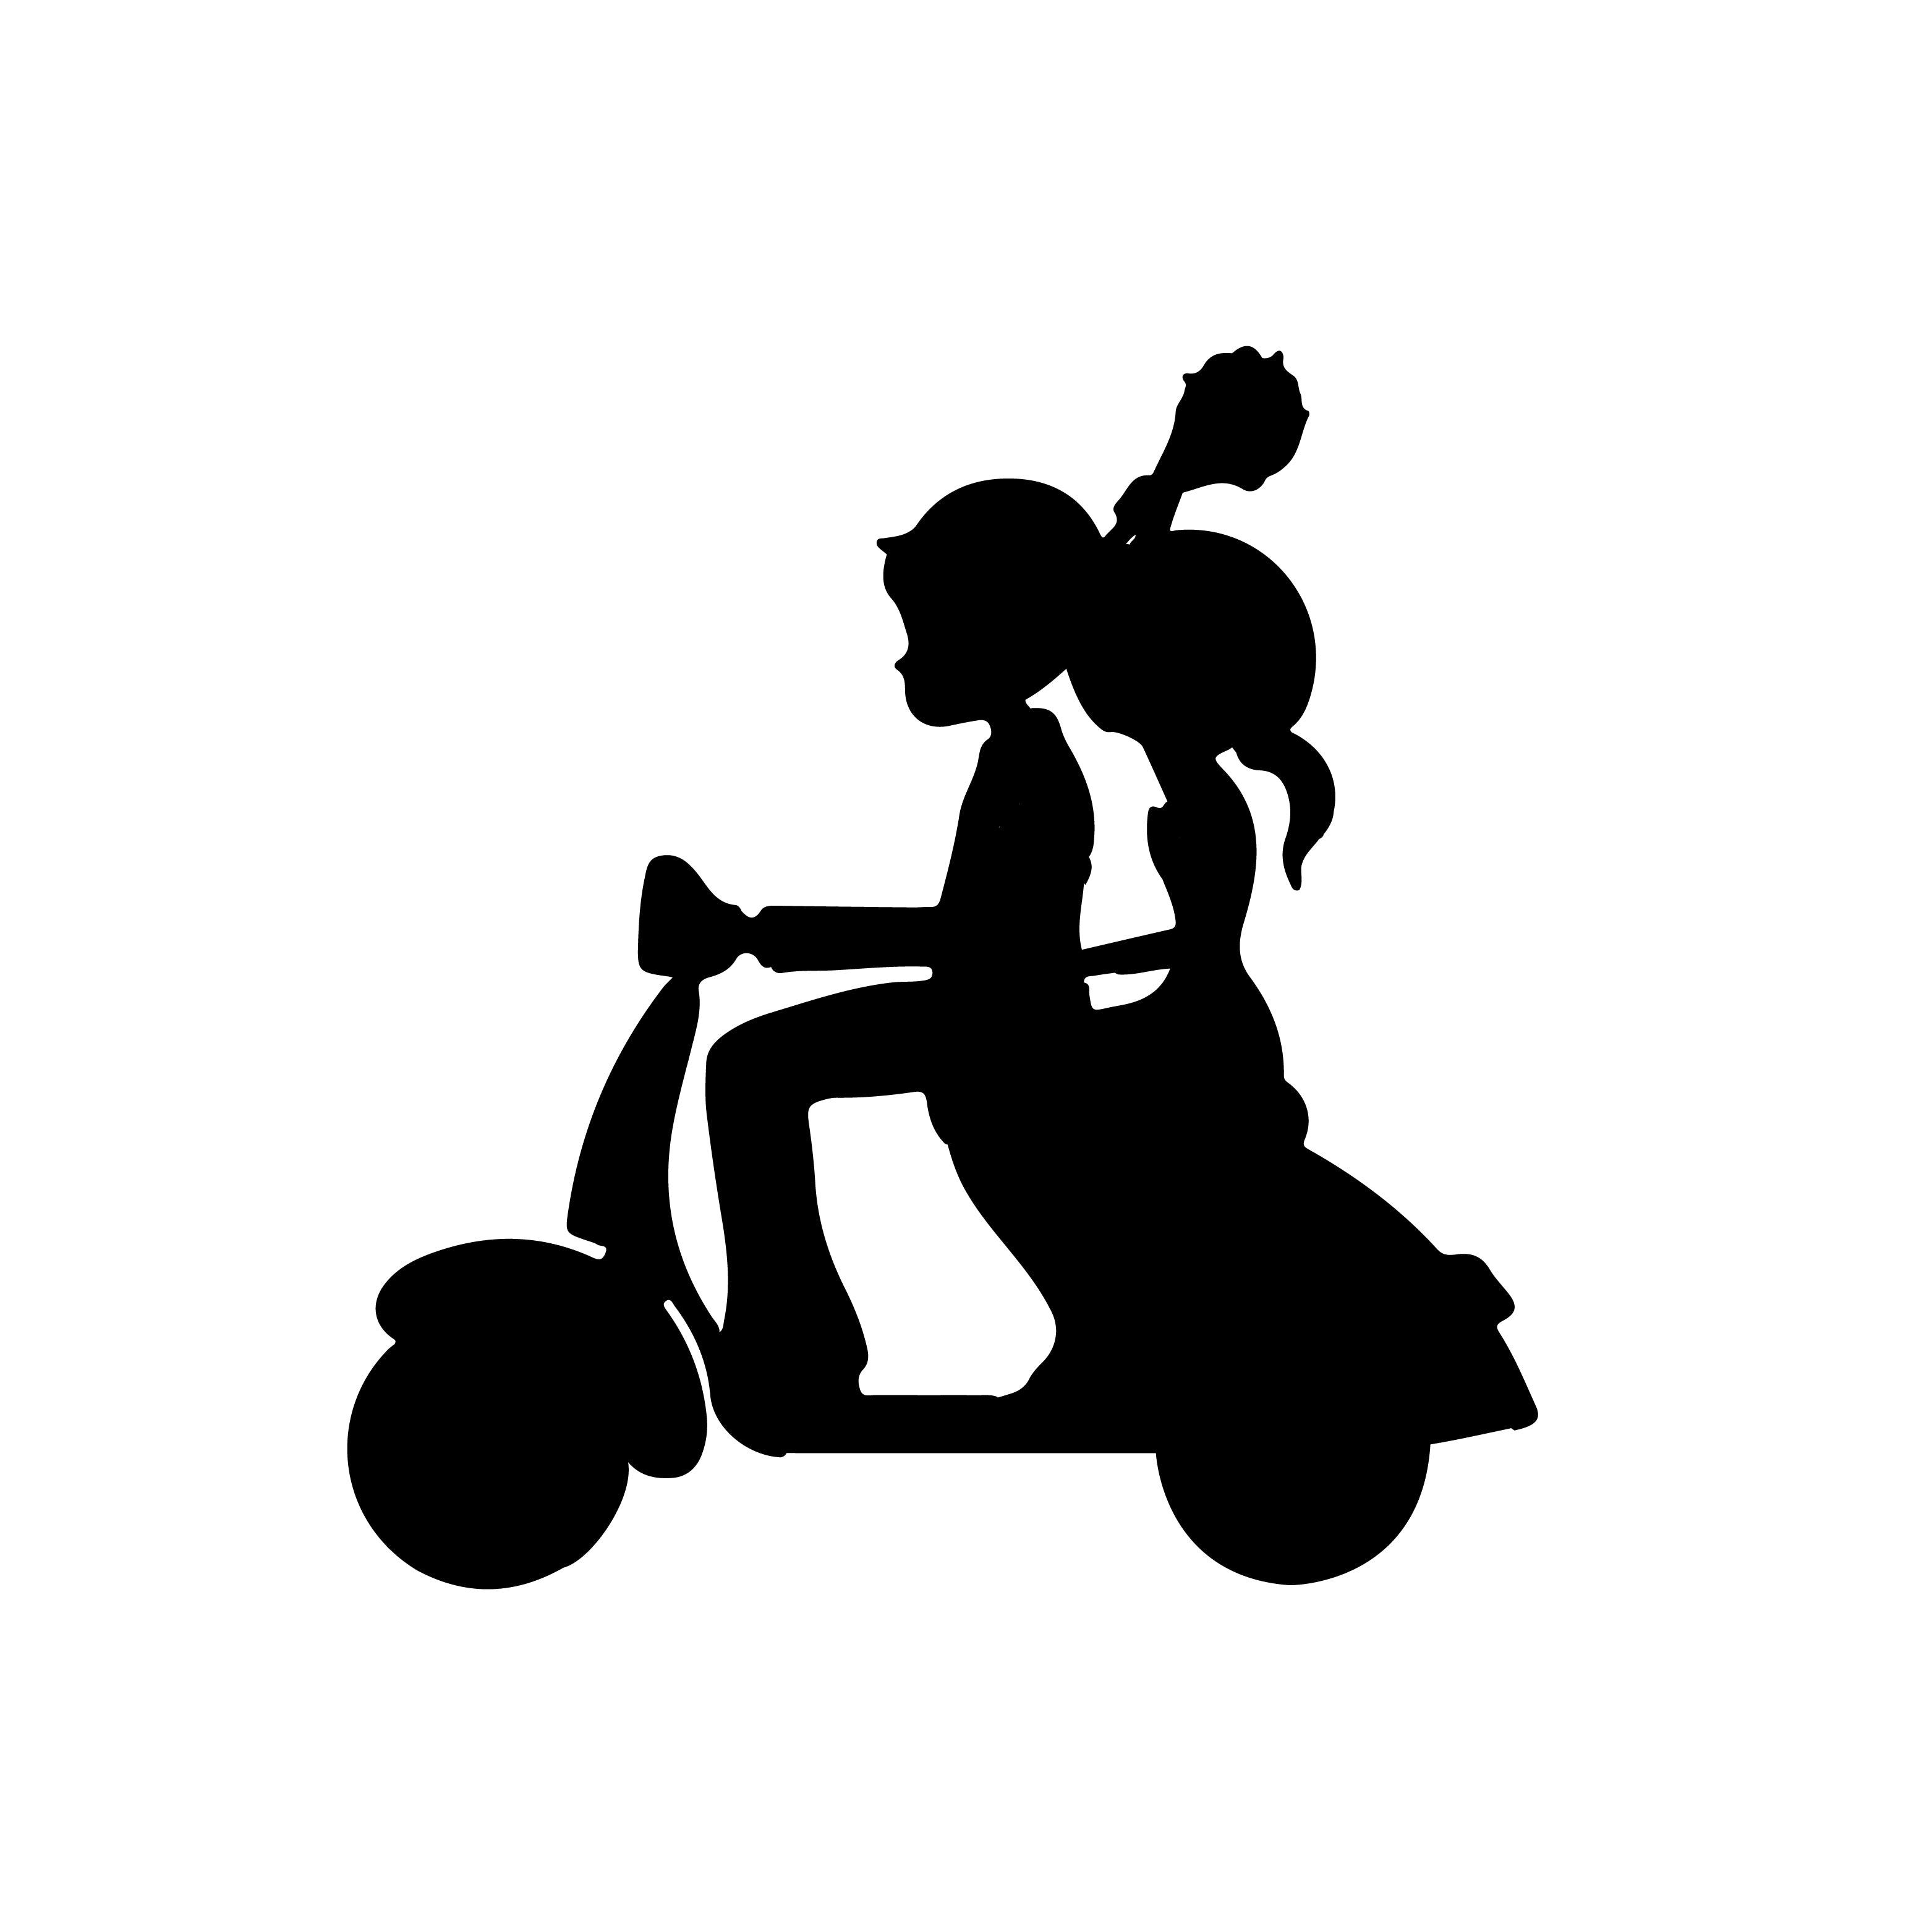 Couple On Scooter Black Engineered Wood Wall Art Cutout, Ready To Hang Home Decor 2